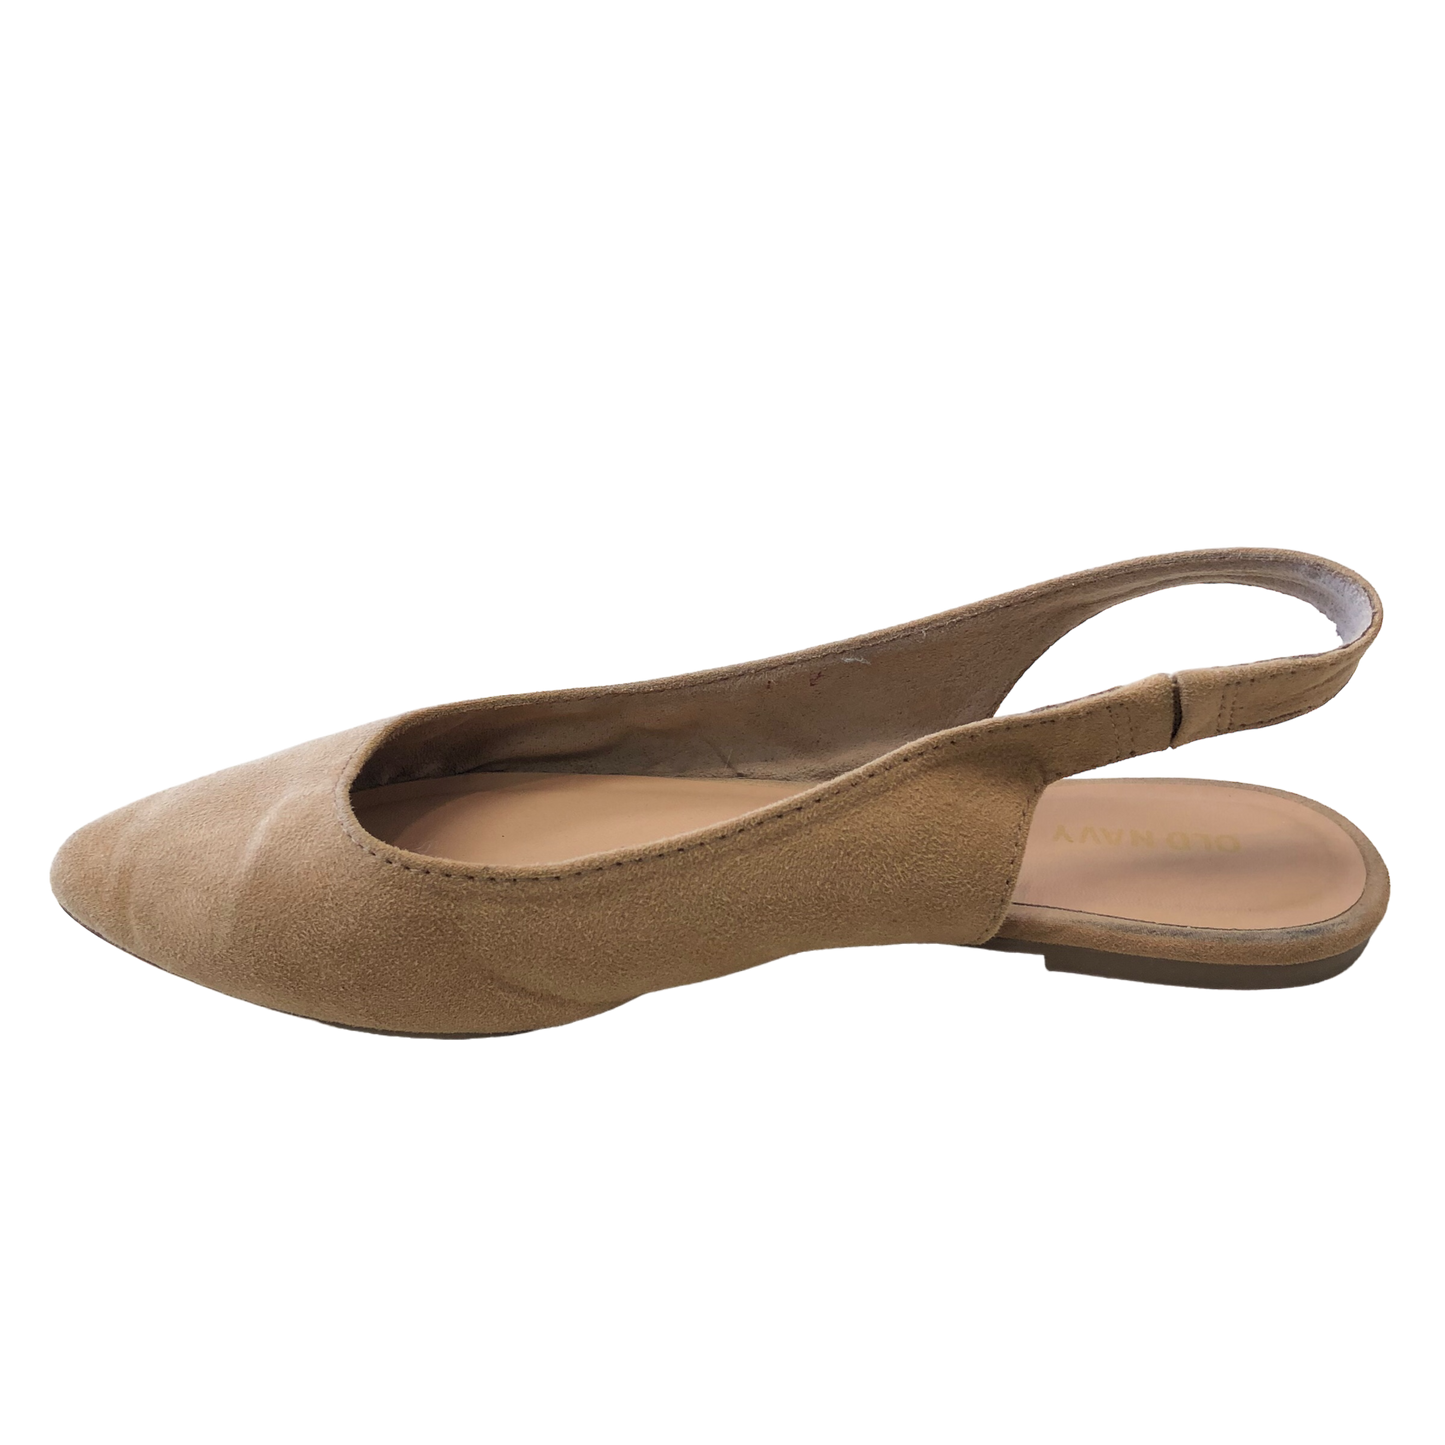 Tan Shoes Flats Ballet Old Navy, Size 8